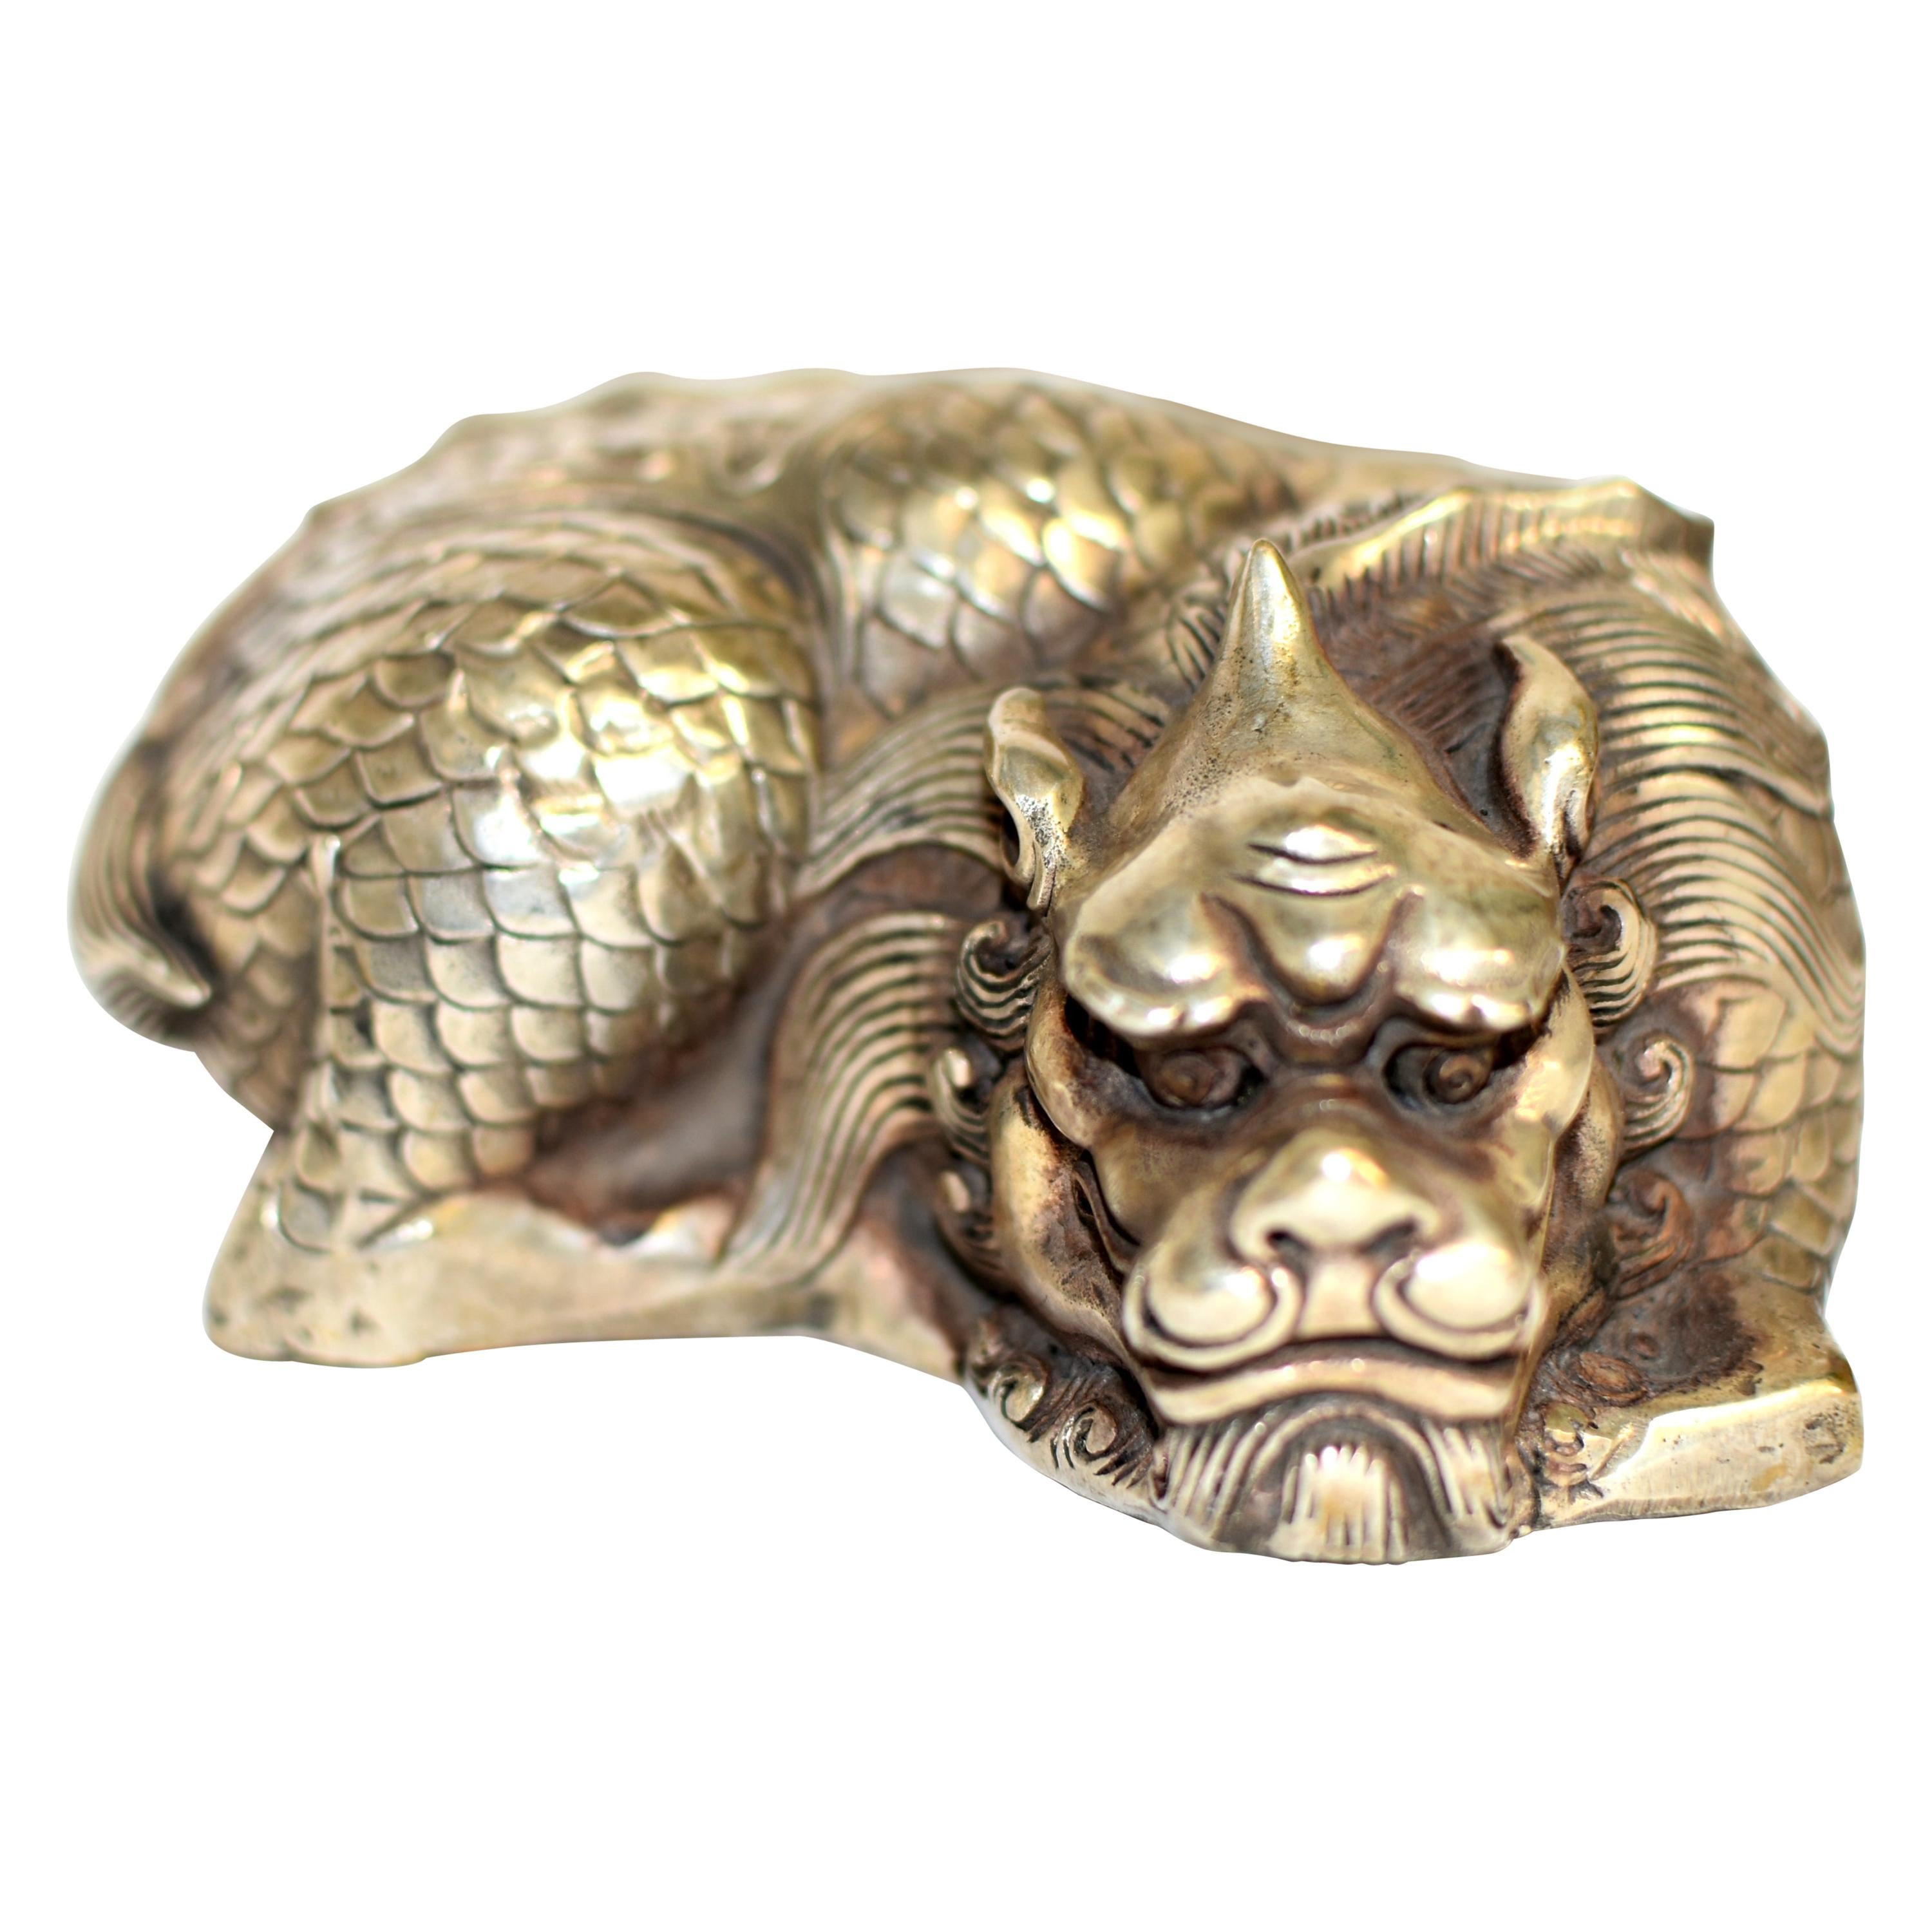 Silver Bronze Coiled Dragon Statue Paperweight